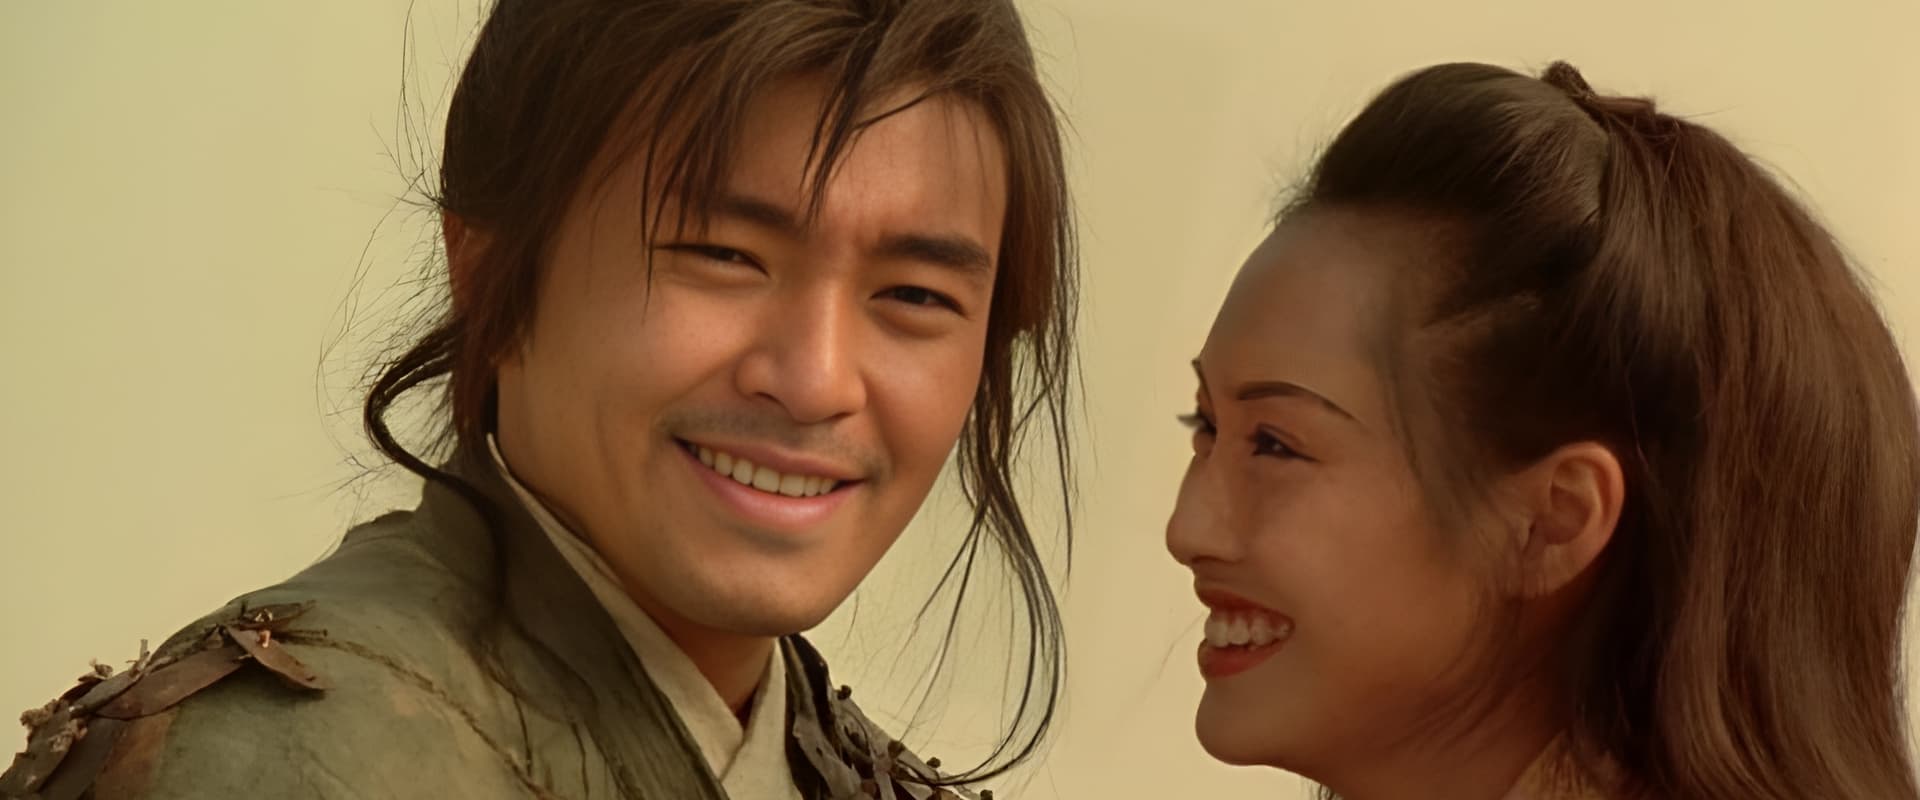 A Chinese Odyssey Part 2